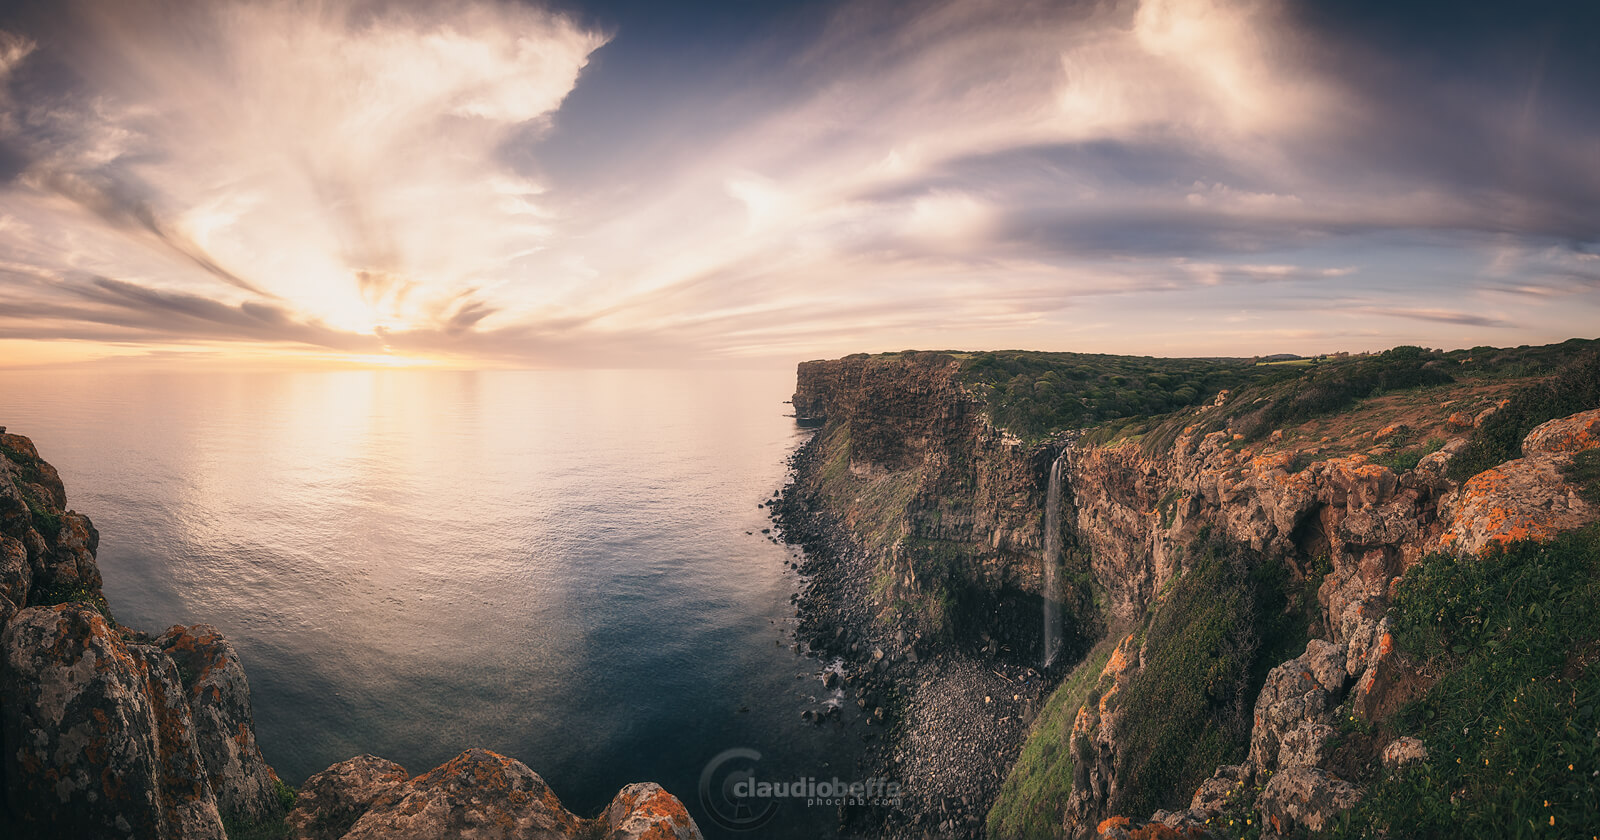 Jump in the sea, sardinia, italy, landscape, seascape, waterfall, cliff, sunset, sea, clouds, panorama